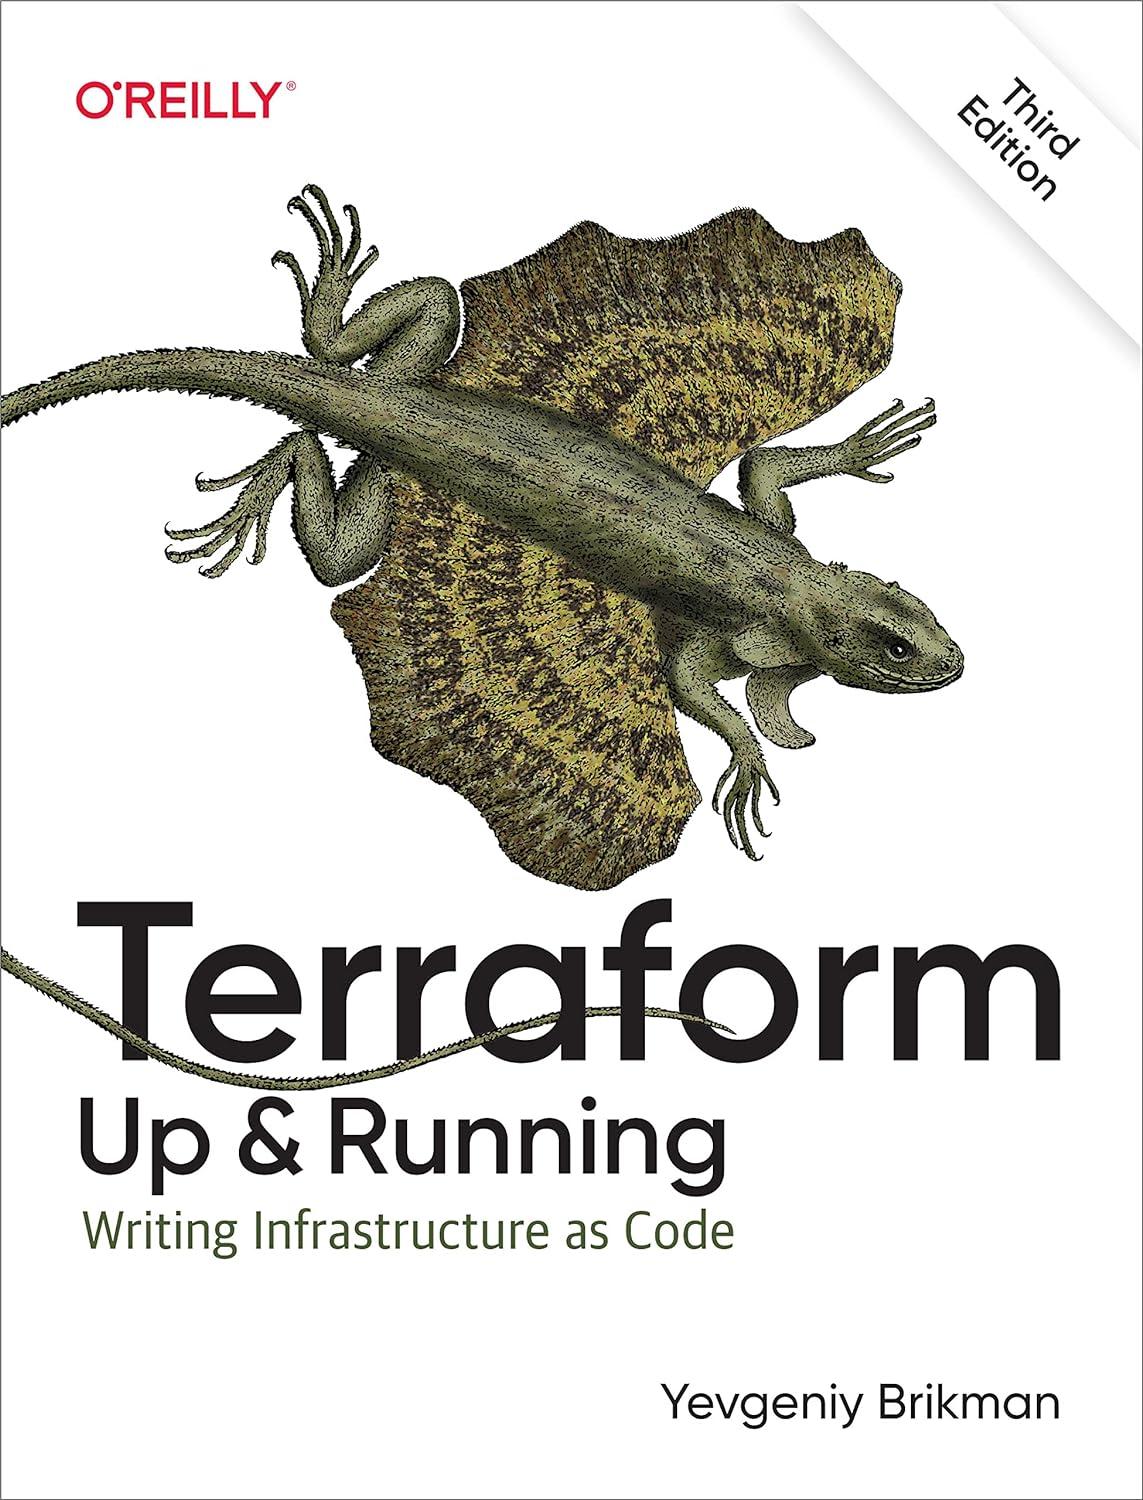 terraform up and running  writing infrastructure as code 3rd edition yevgeniy brikman 1098116747,